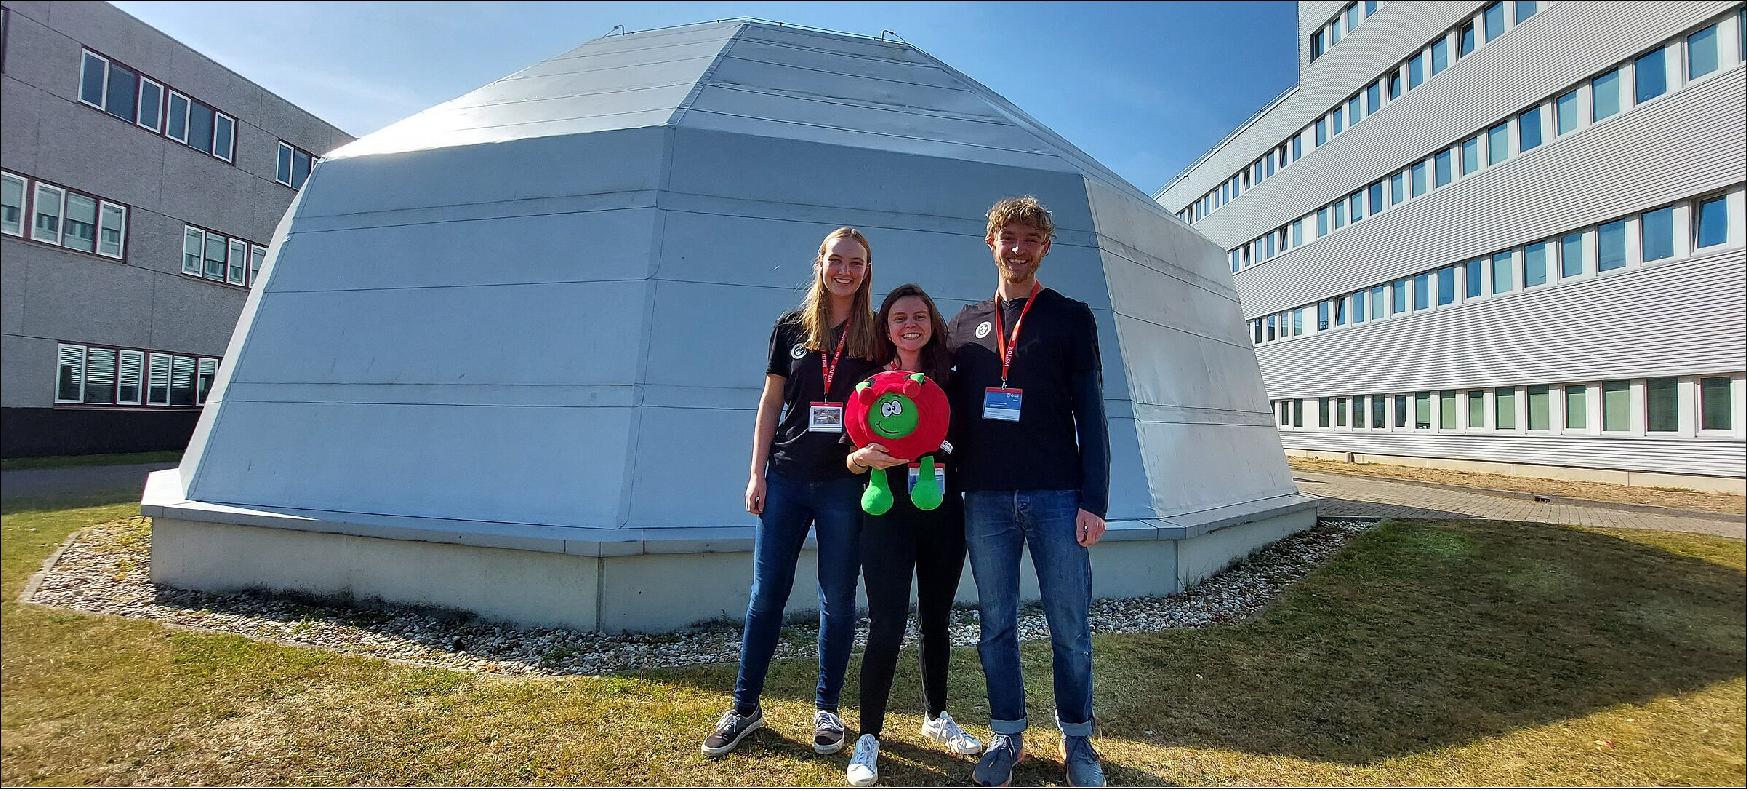 Figure 10: Three out of four team members posing in front of the LDC facility (image credit: ESA)